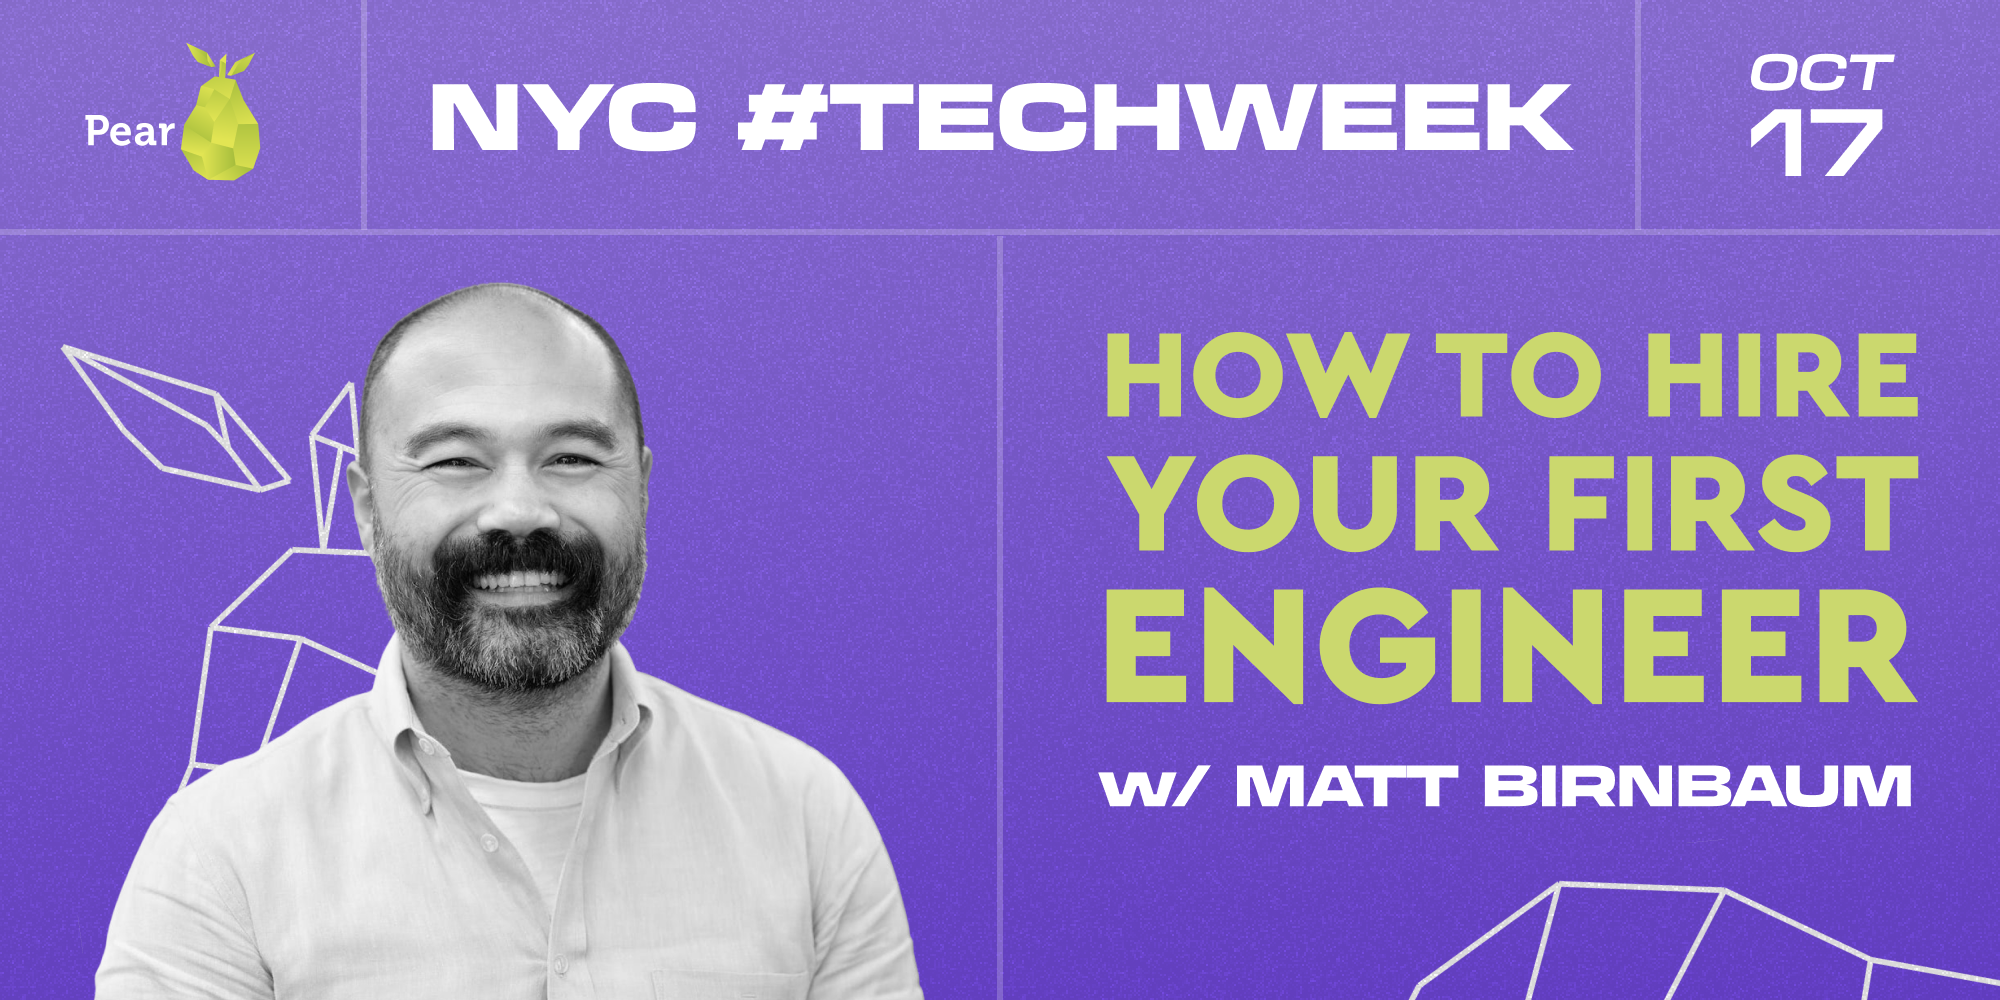 event NYC #TechWeek x Pear VC: How to hire your first engineer with Matt Birnbaum, Talent Partner at Pear VC